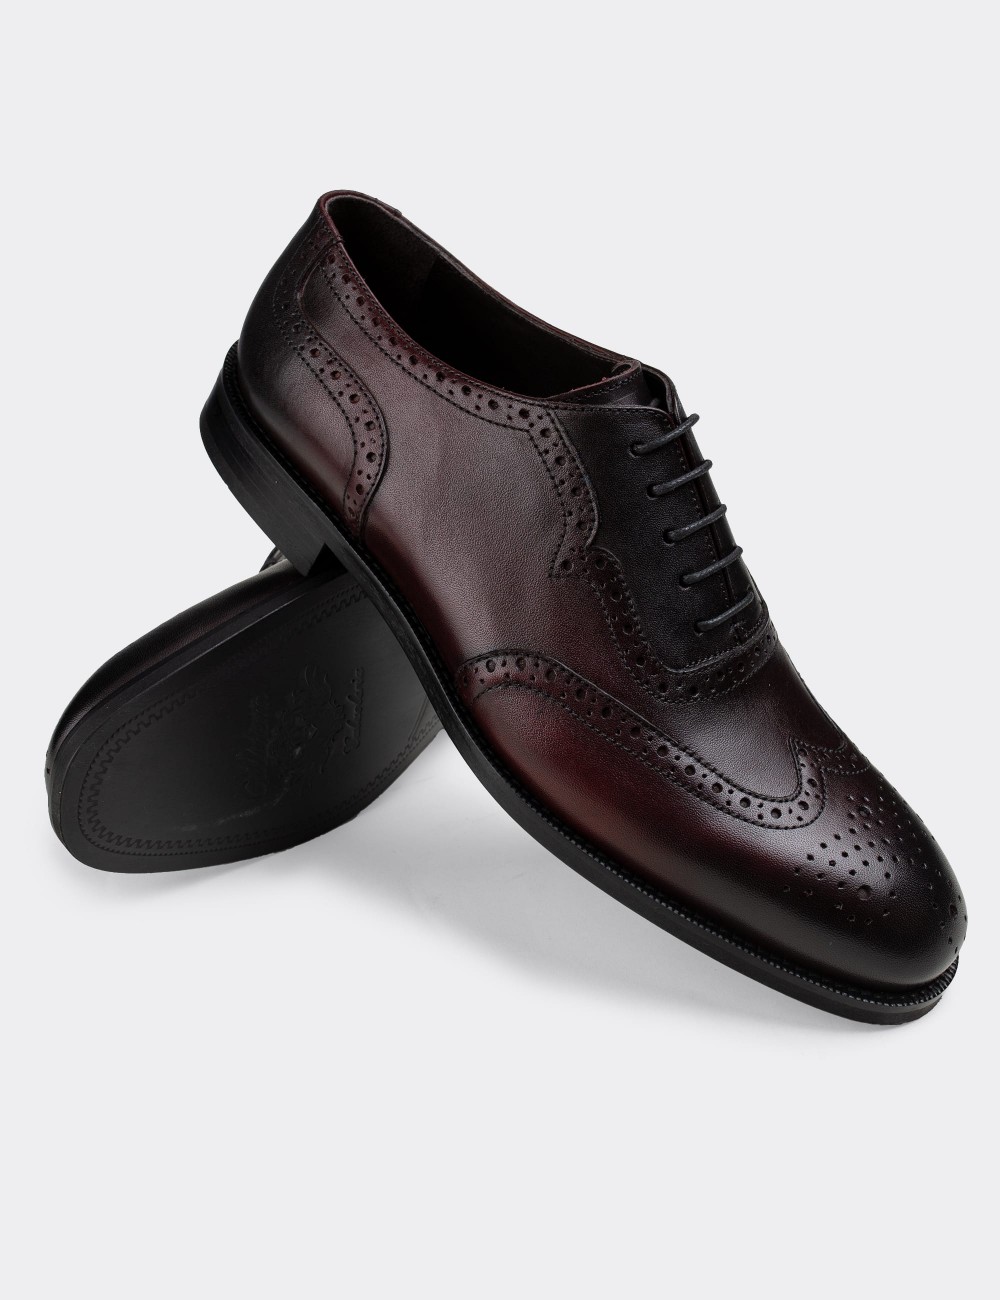 Burgundy  Leather Classic Shoes - 01676MBRDM01